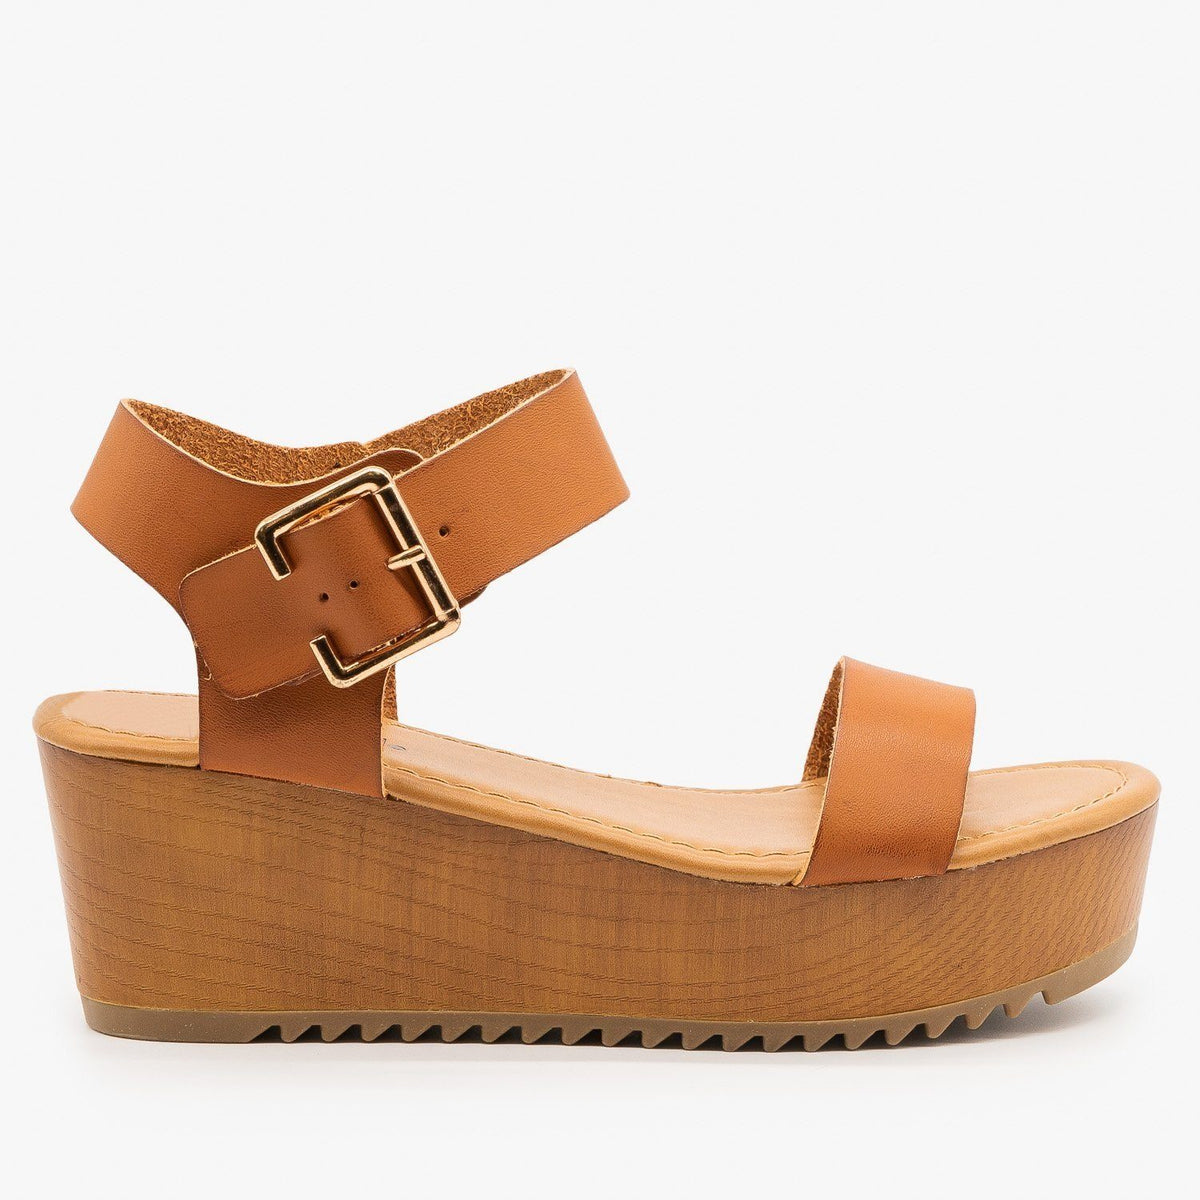 wooden wedge clogs